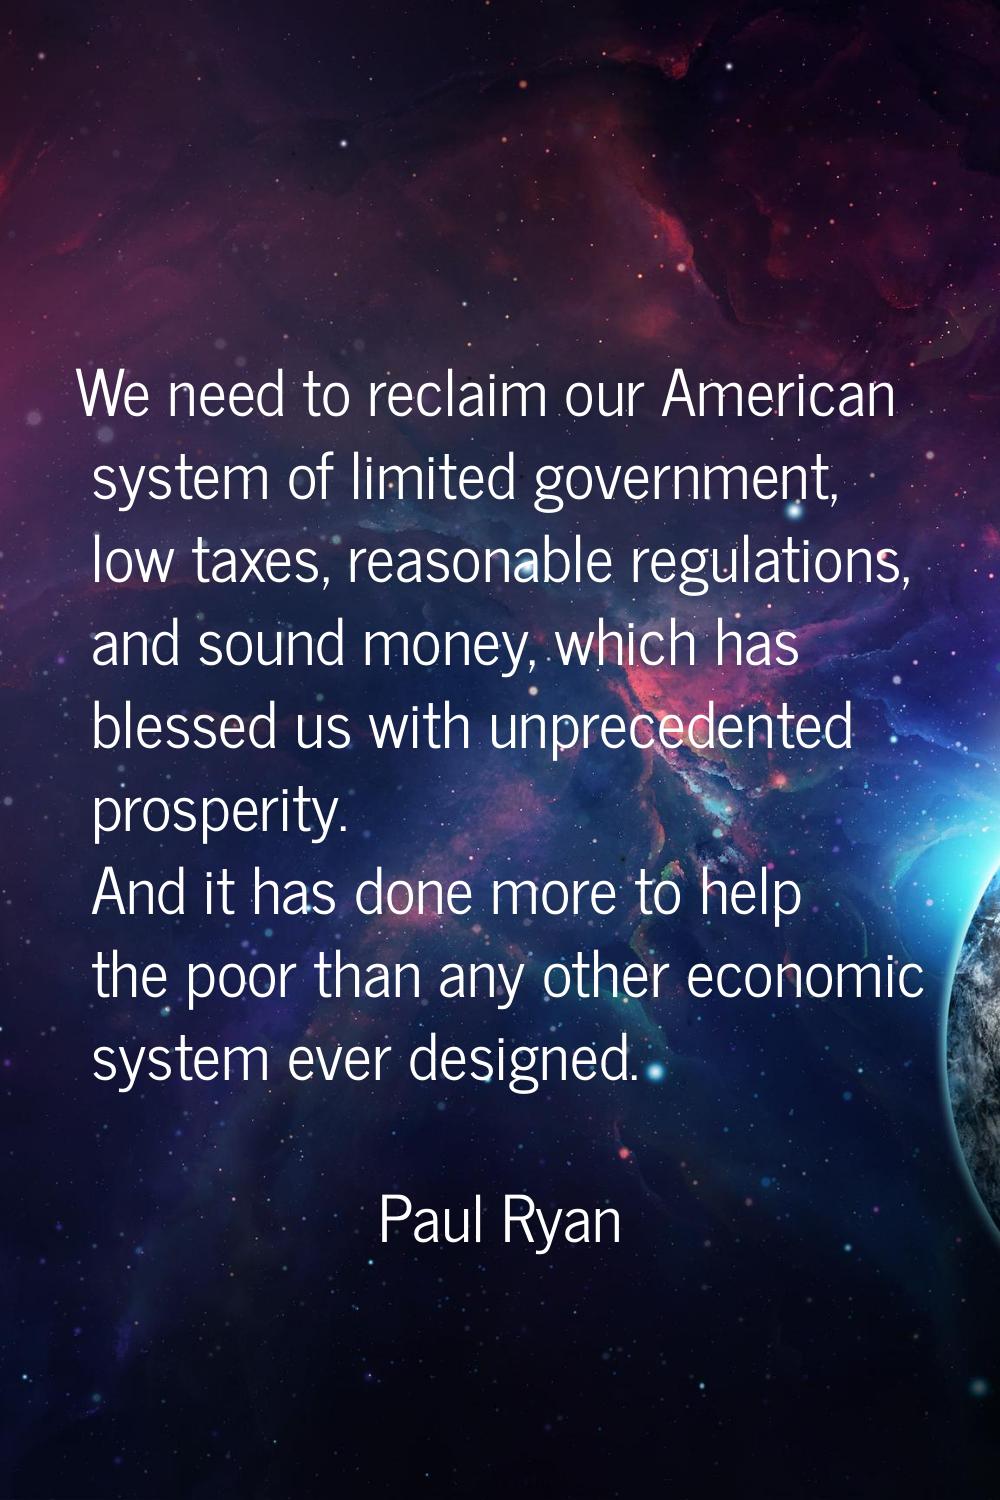 We need to reclaim our American system of limited government, low taxes, reasonable regulations, an